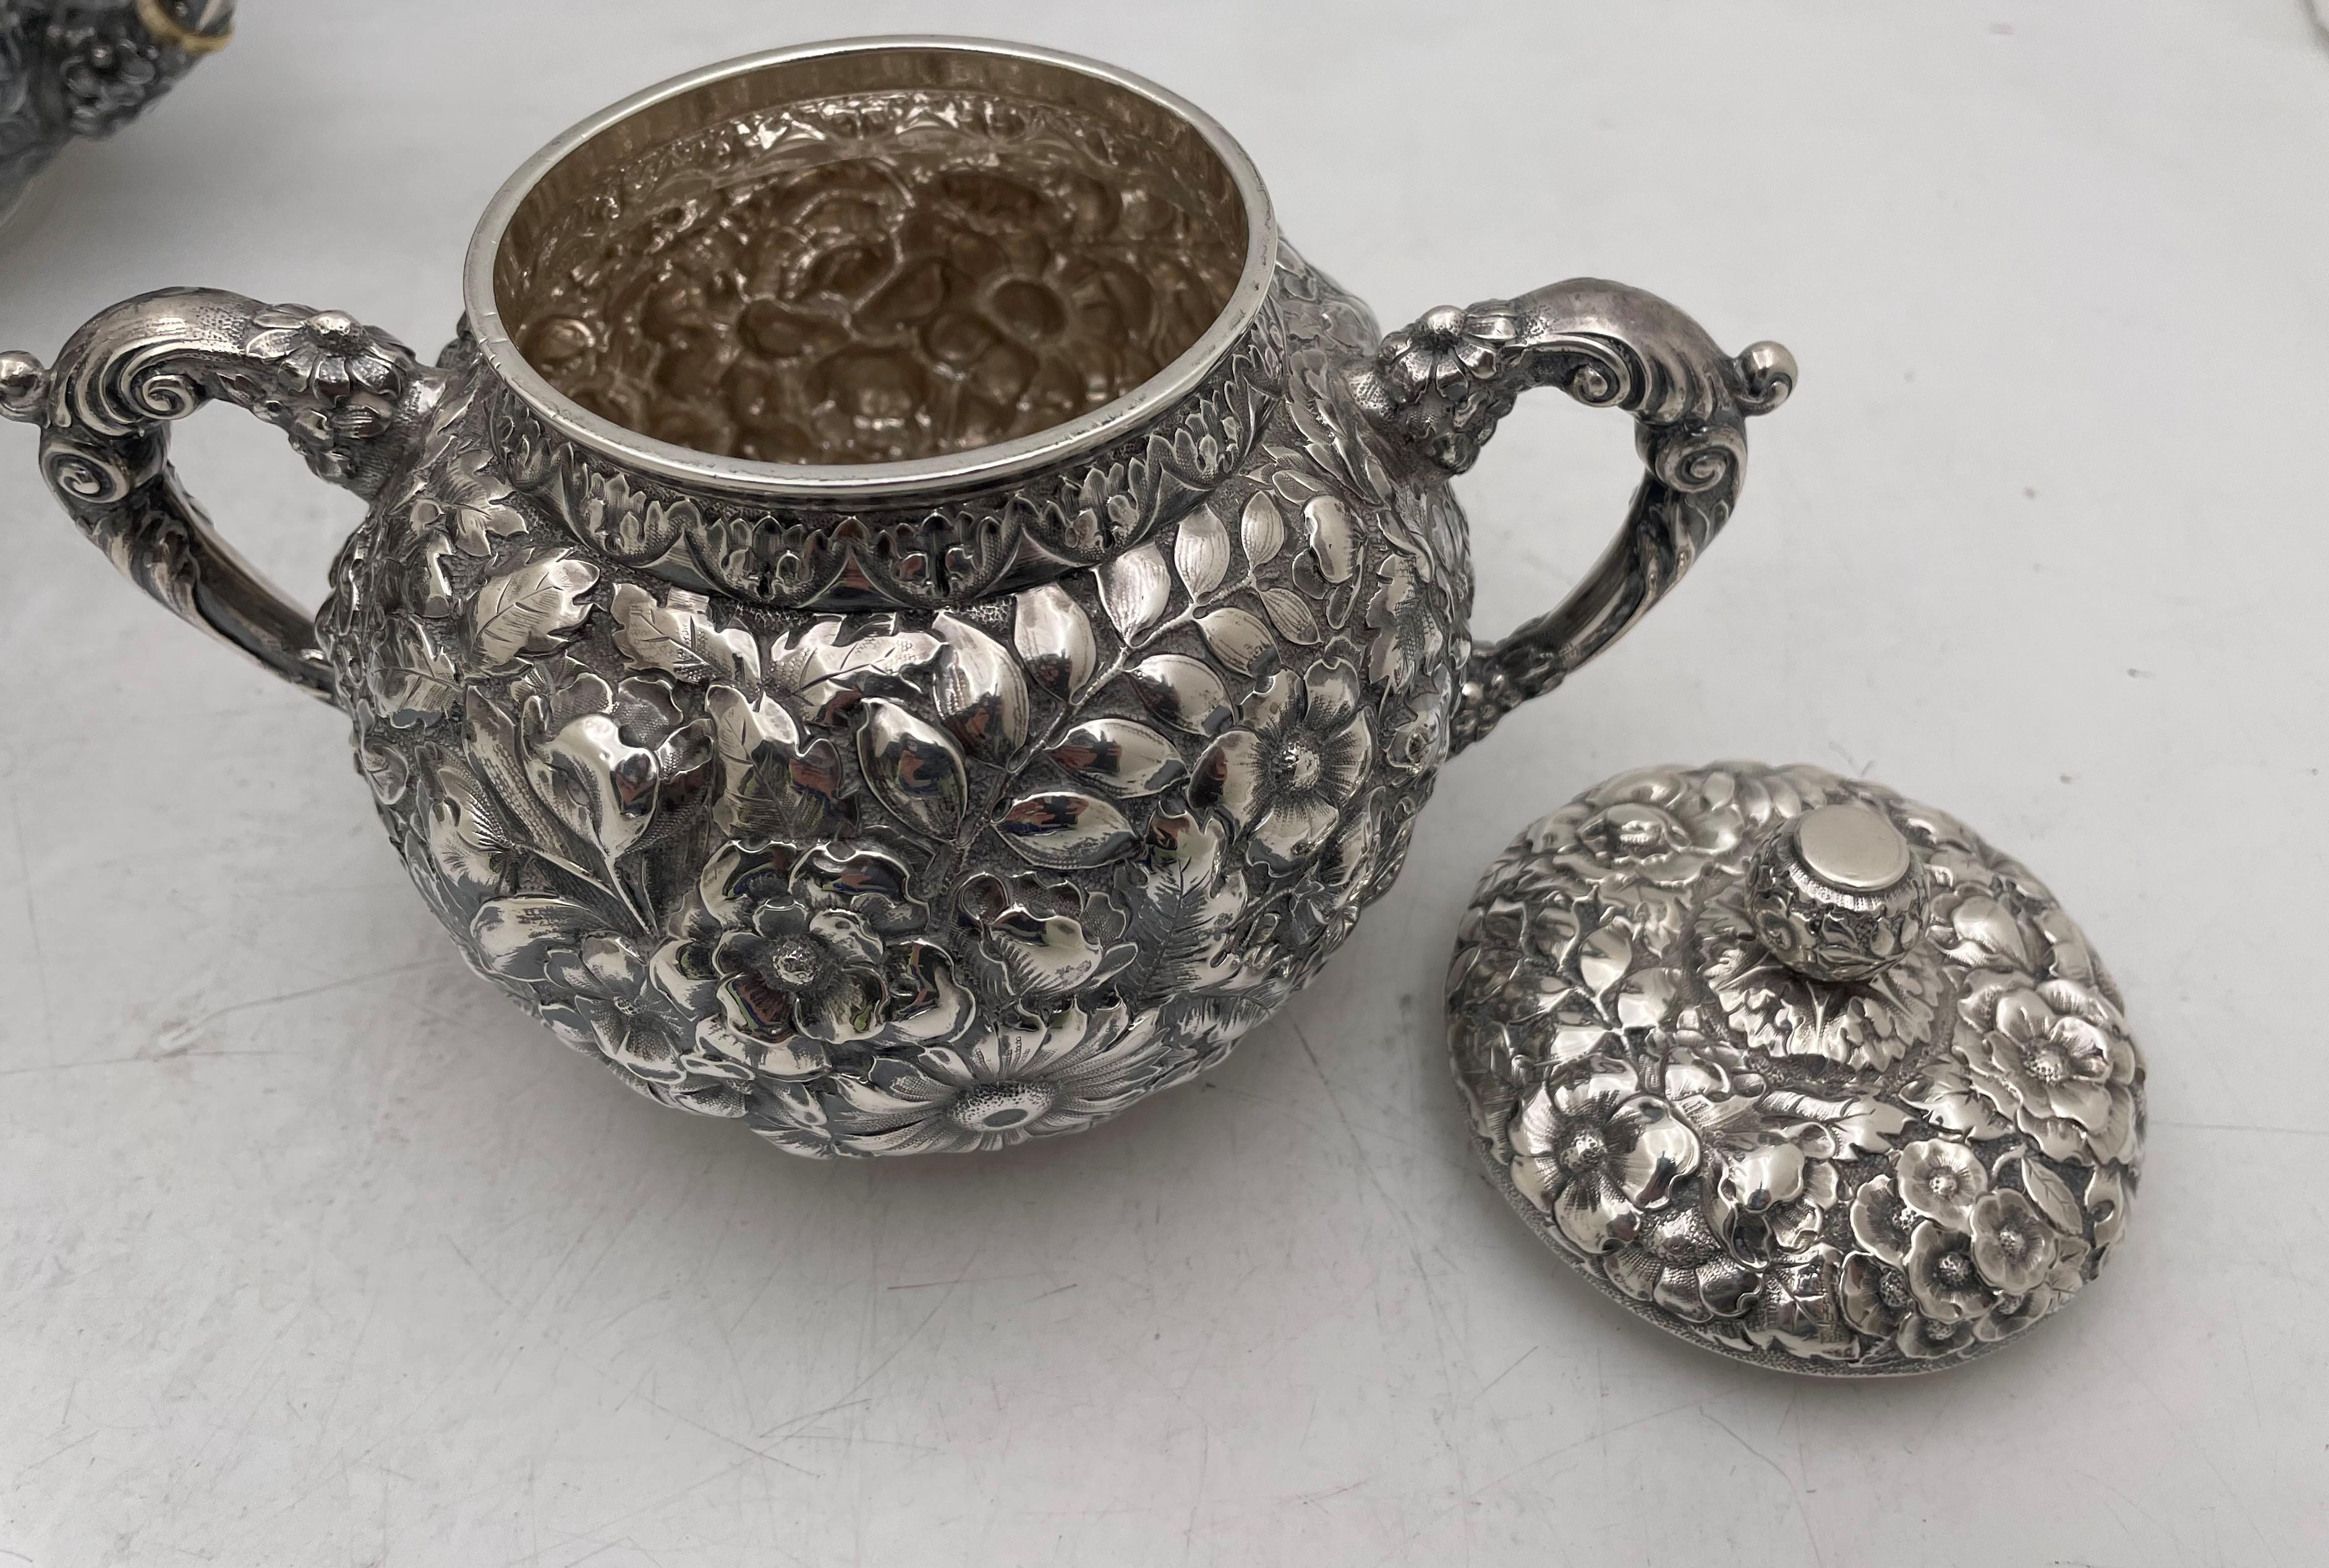 Wood & Hughes Sterling Silver 6-Piece Repousse 19th Century Tea Set with Tray For Sale 7